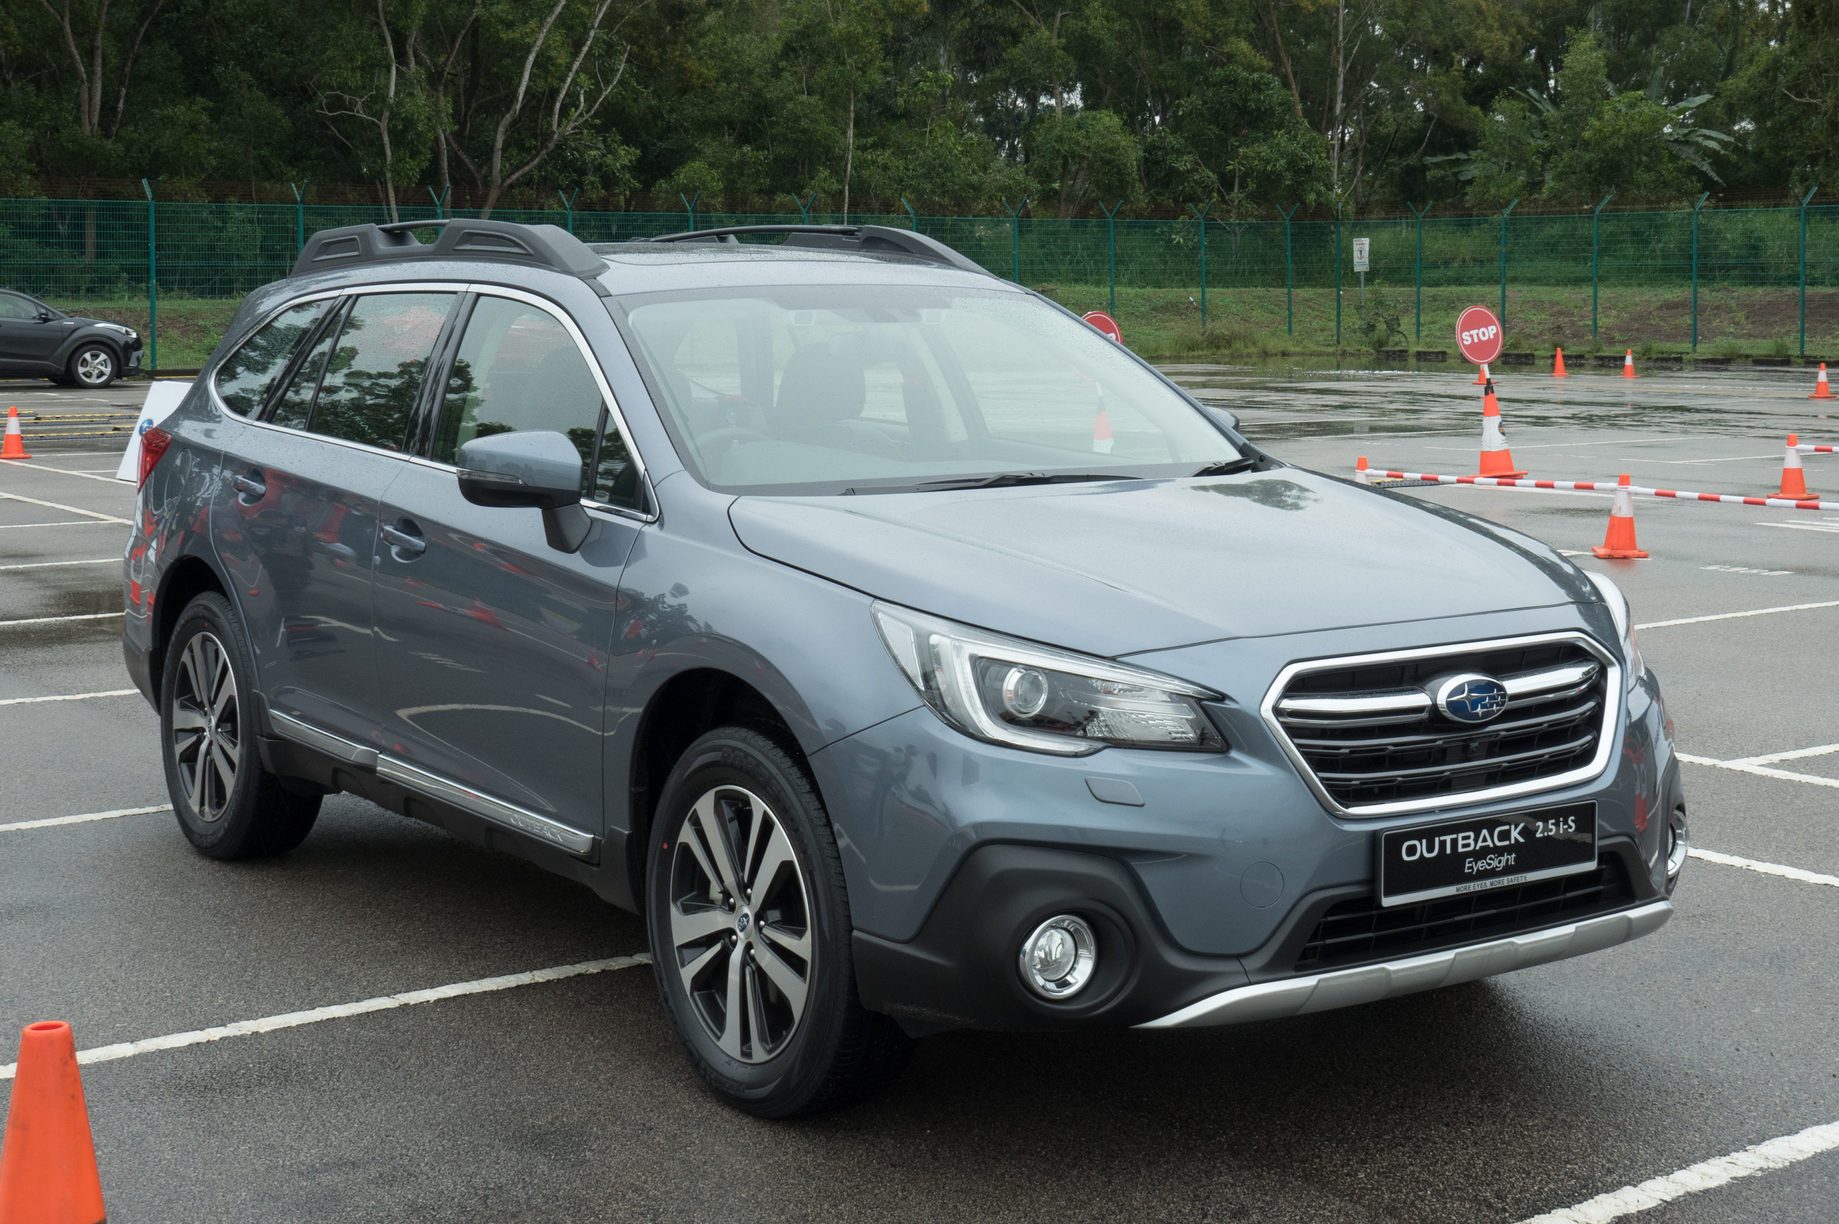 <p>The all-wheel-drive Outback is a rugged, high-mileage workhorse of a car that can be relied on to continue to provide a low-maintenance, low-cost of ownership experience even when buying a used model from upwards of a dozen years ago. Subarus are often considered good values both used and new.</p>